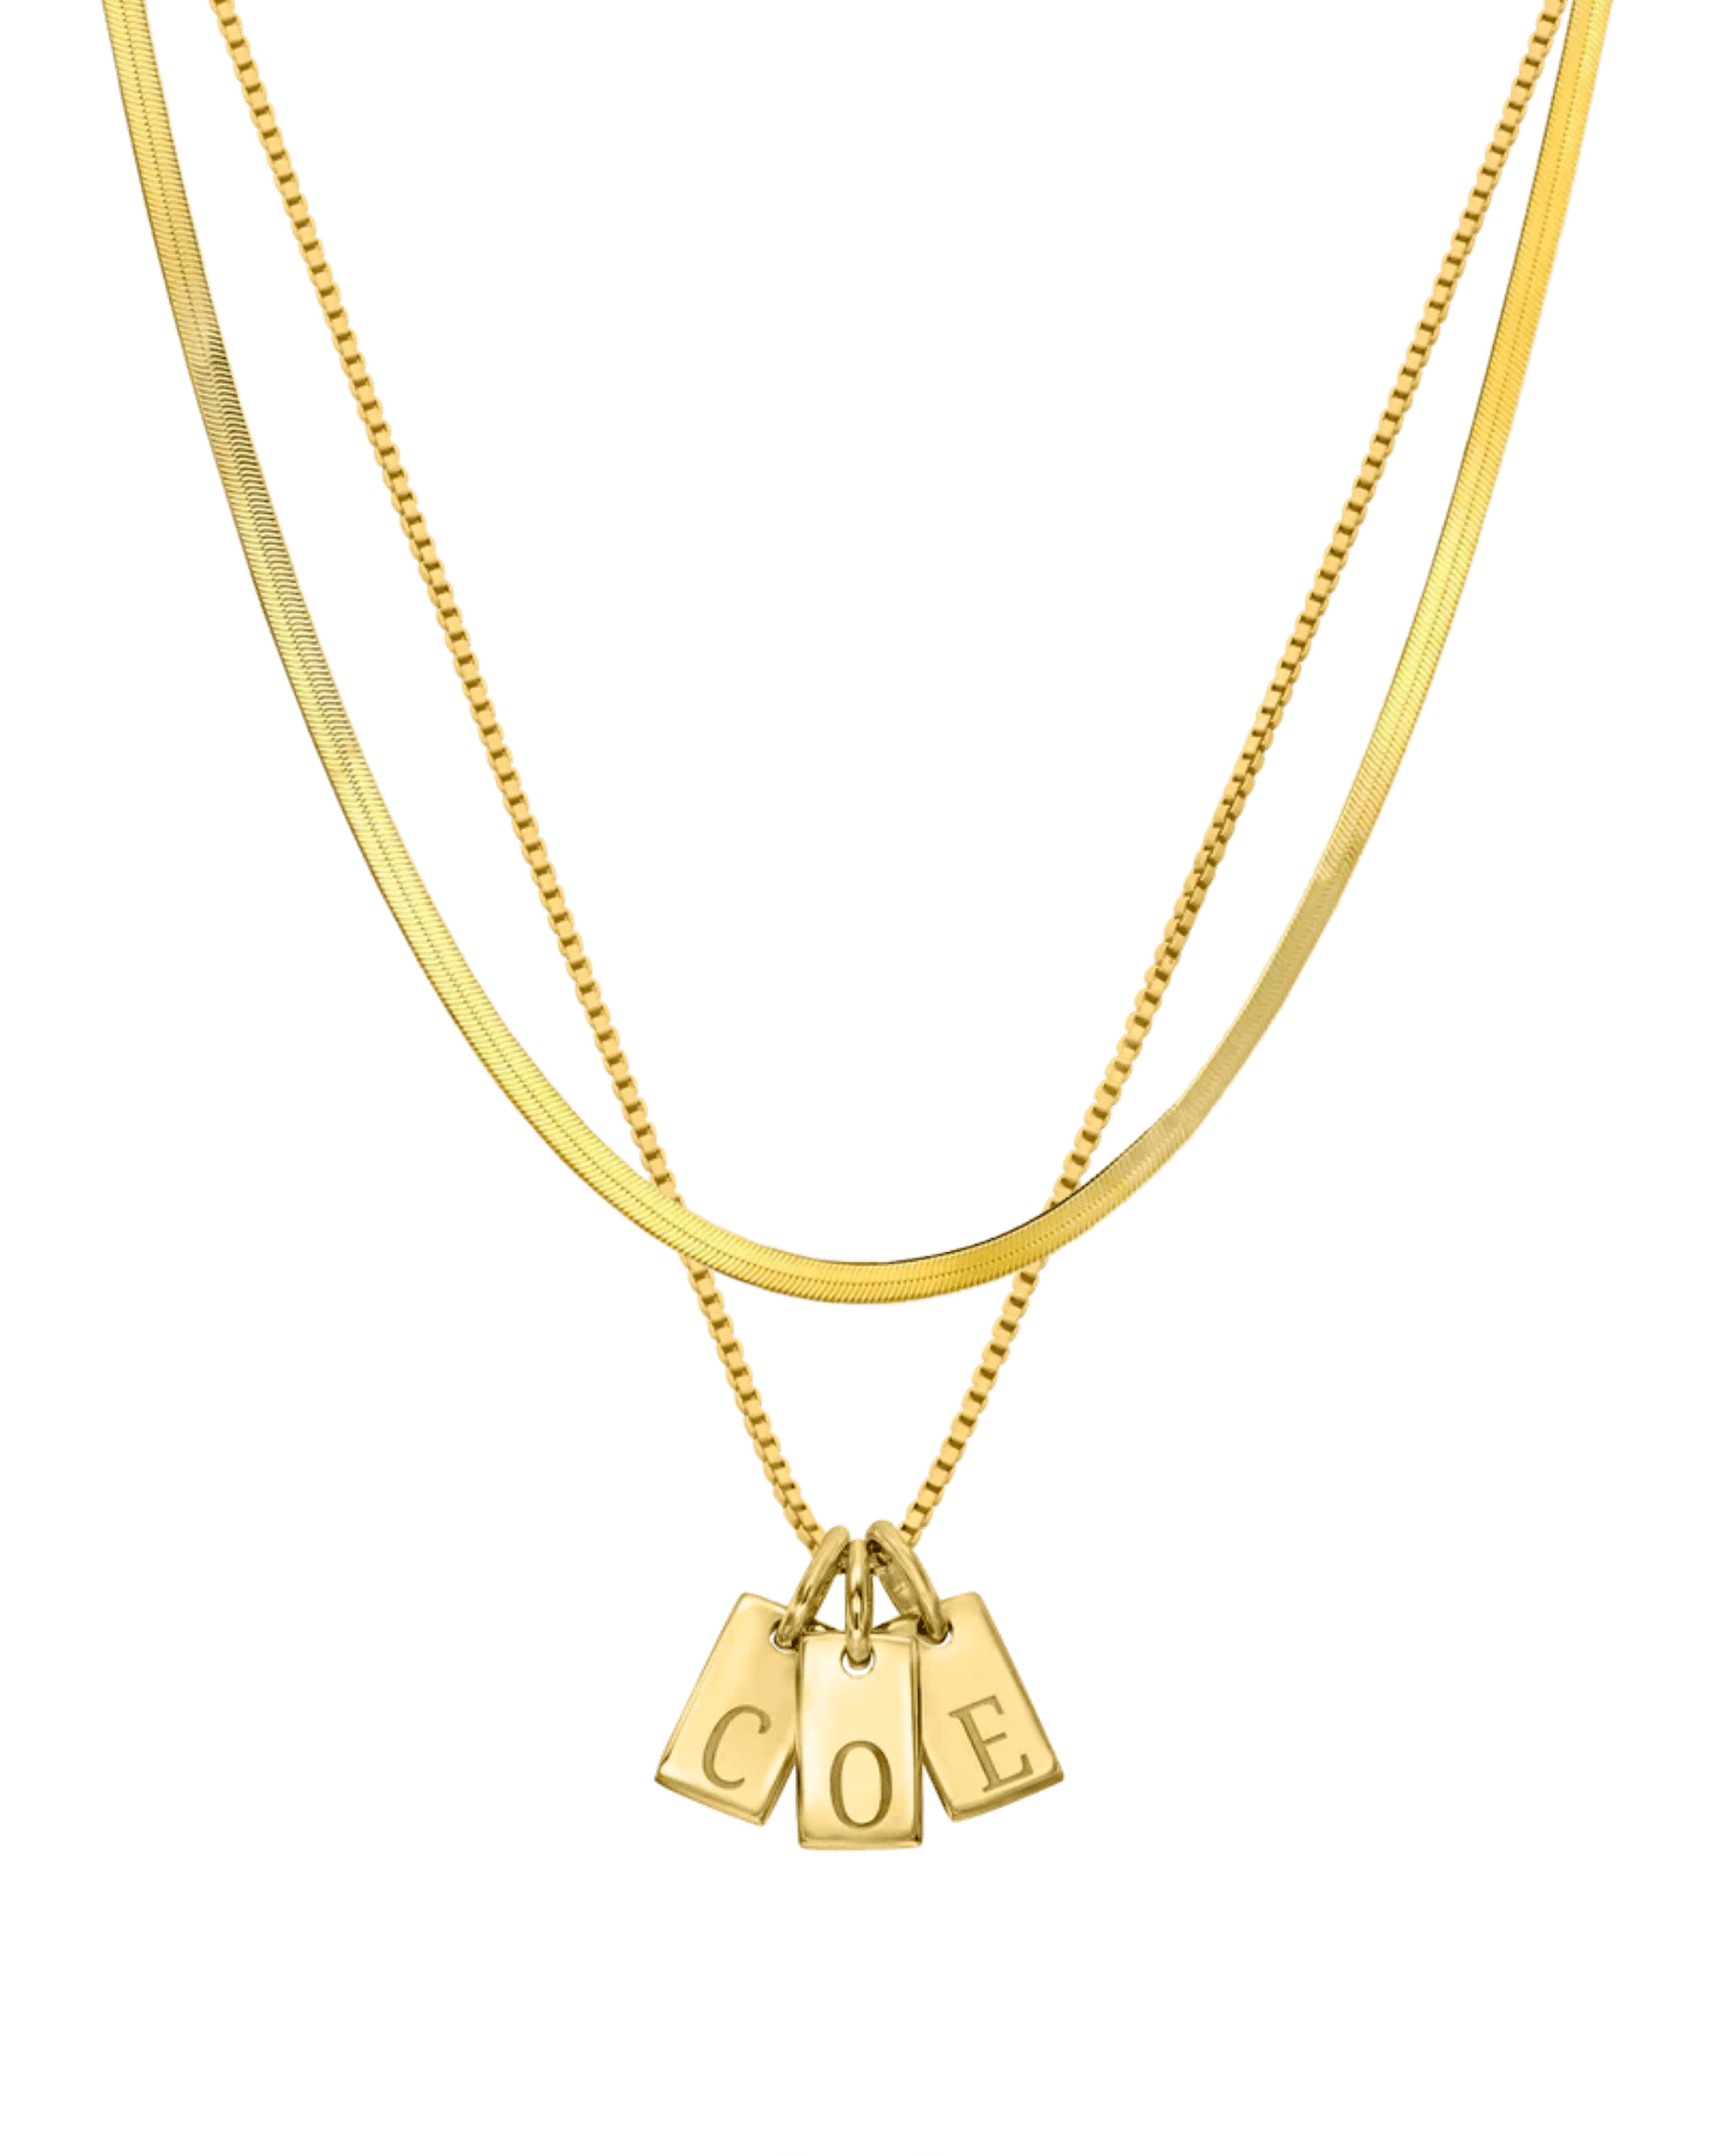 Set of Initial Mini Dogtag & Herringbone Chain Necklaces - 18K Gold Vermeil Necklaces magal-dev 1 Tag 